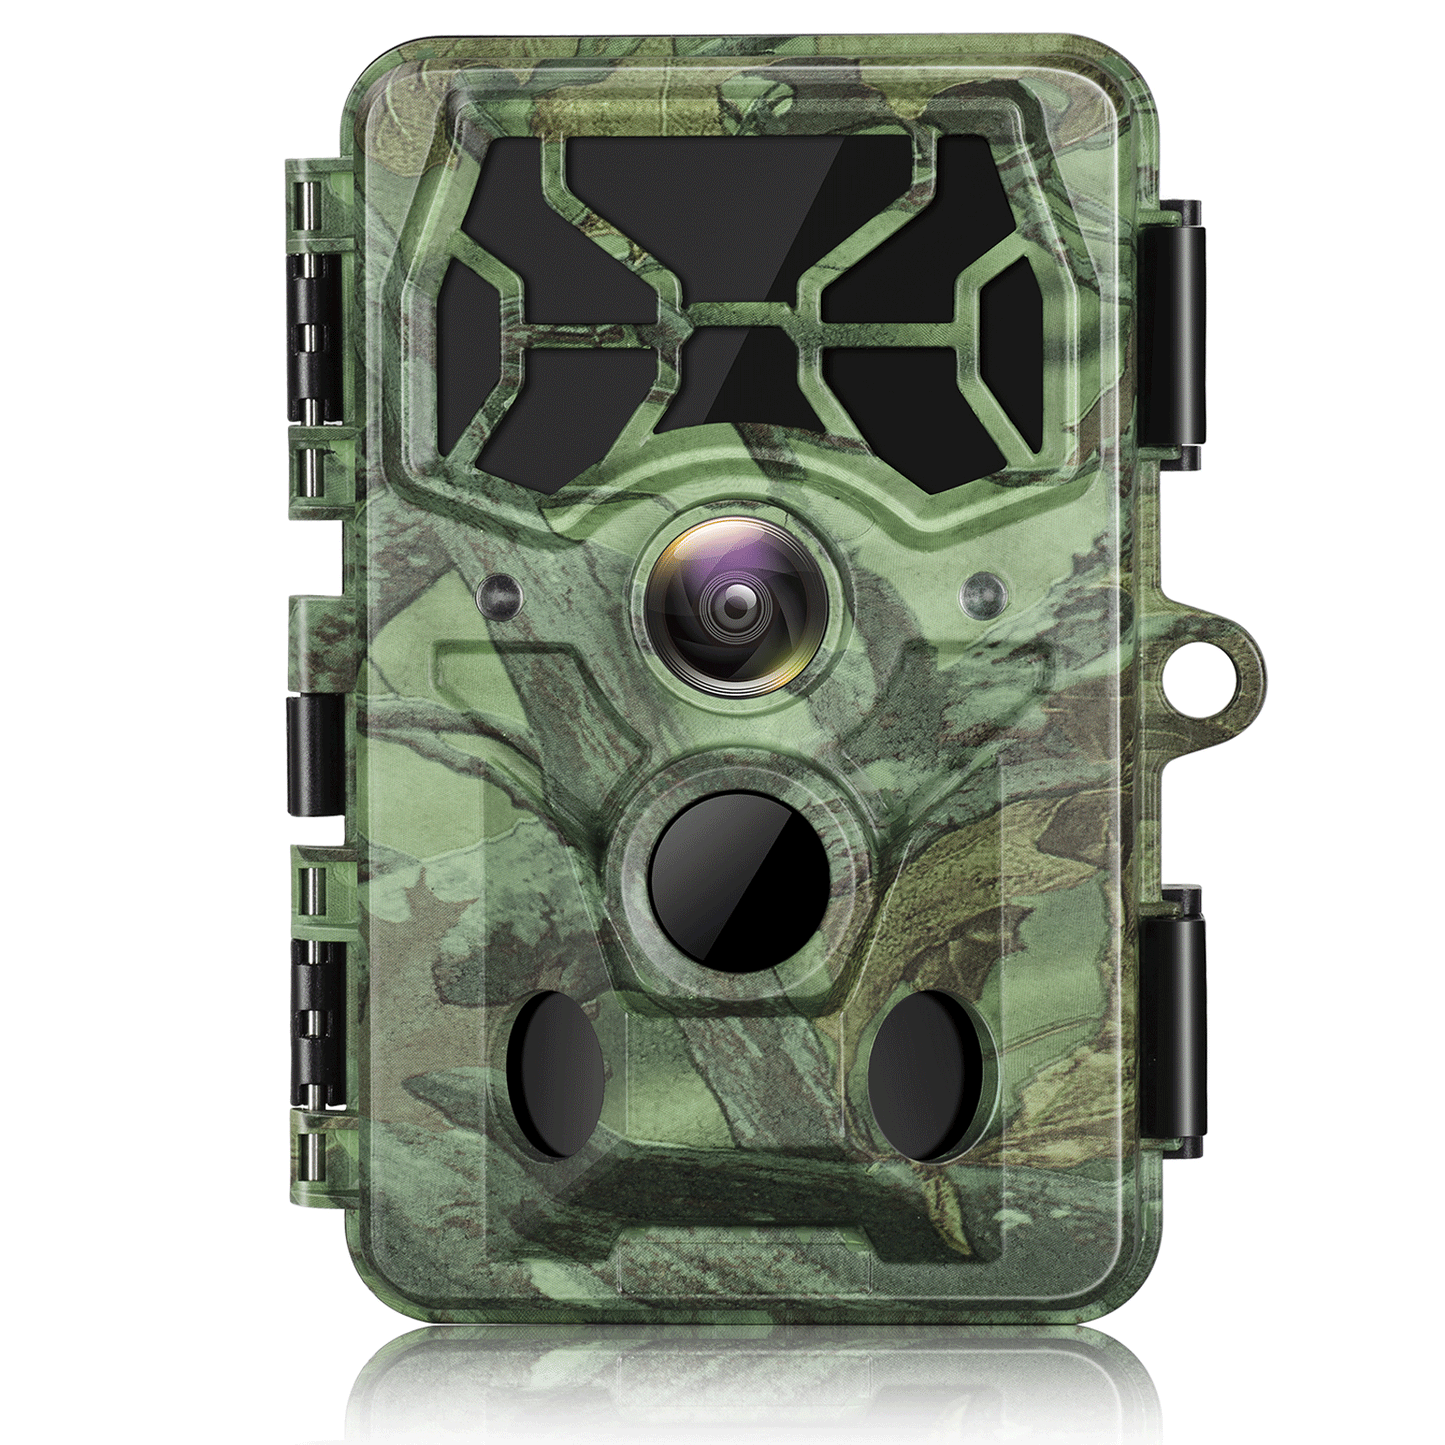 Campark 4K WiFi Trail Camera Deer Hunting Game Camera with Night Vision Waterproof 30MP for Outdoor Wildlife Monitoring